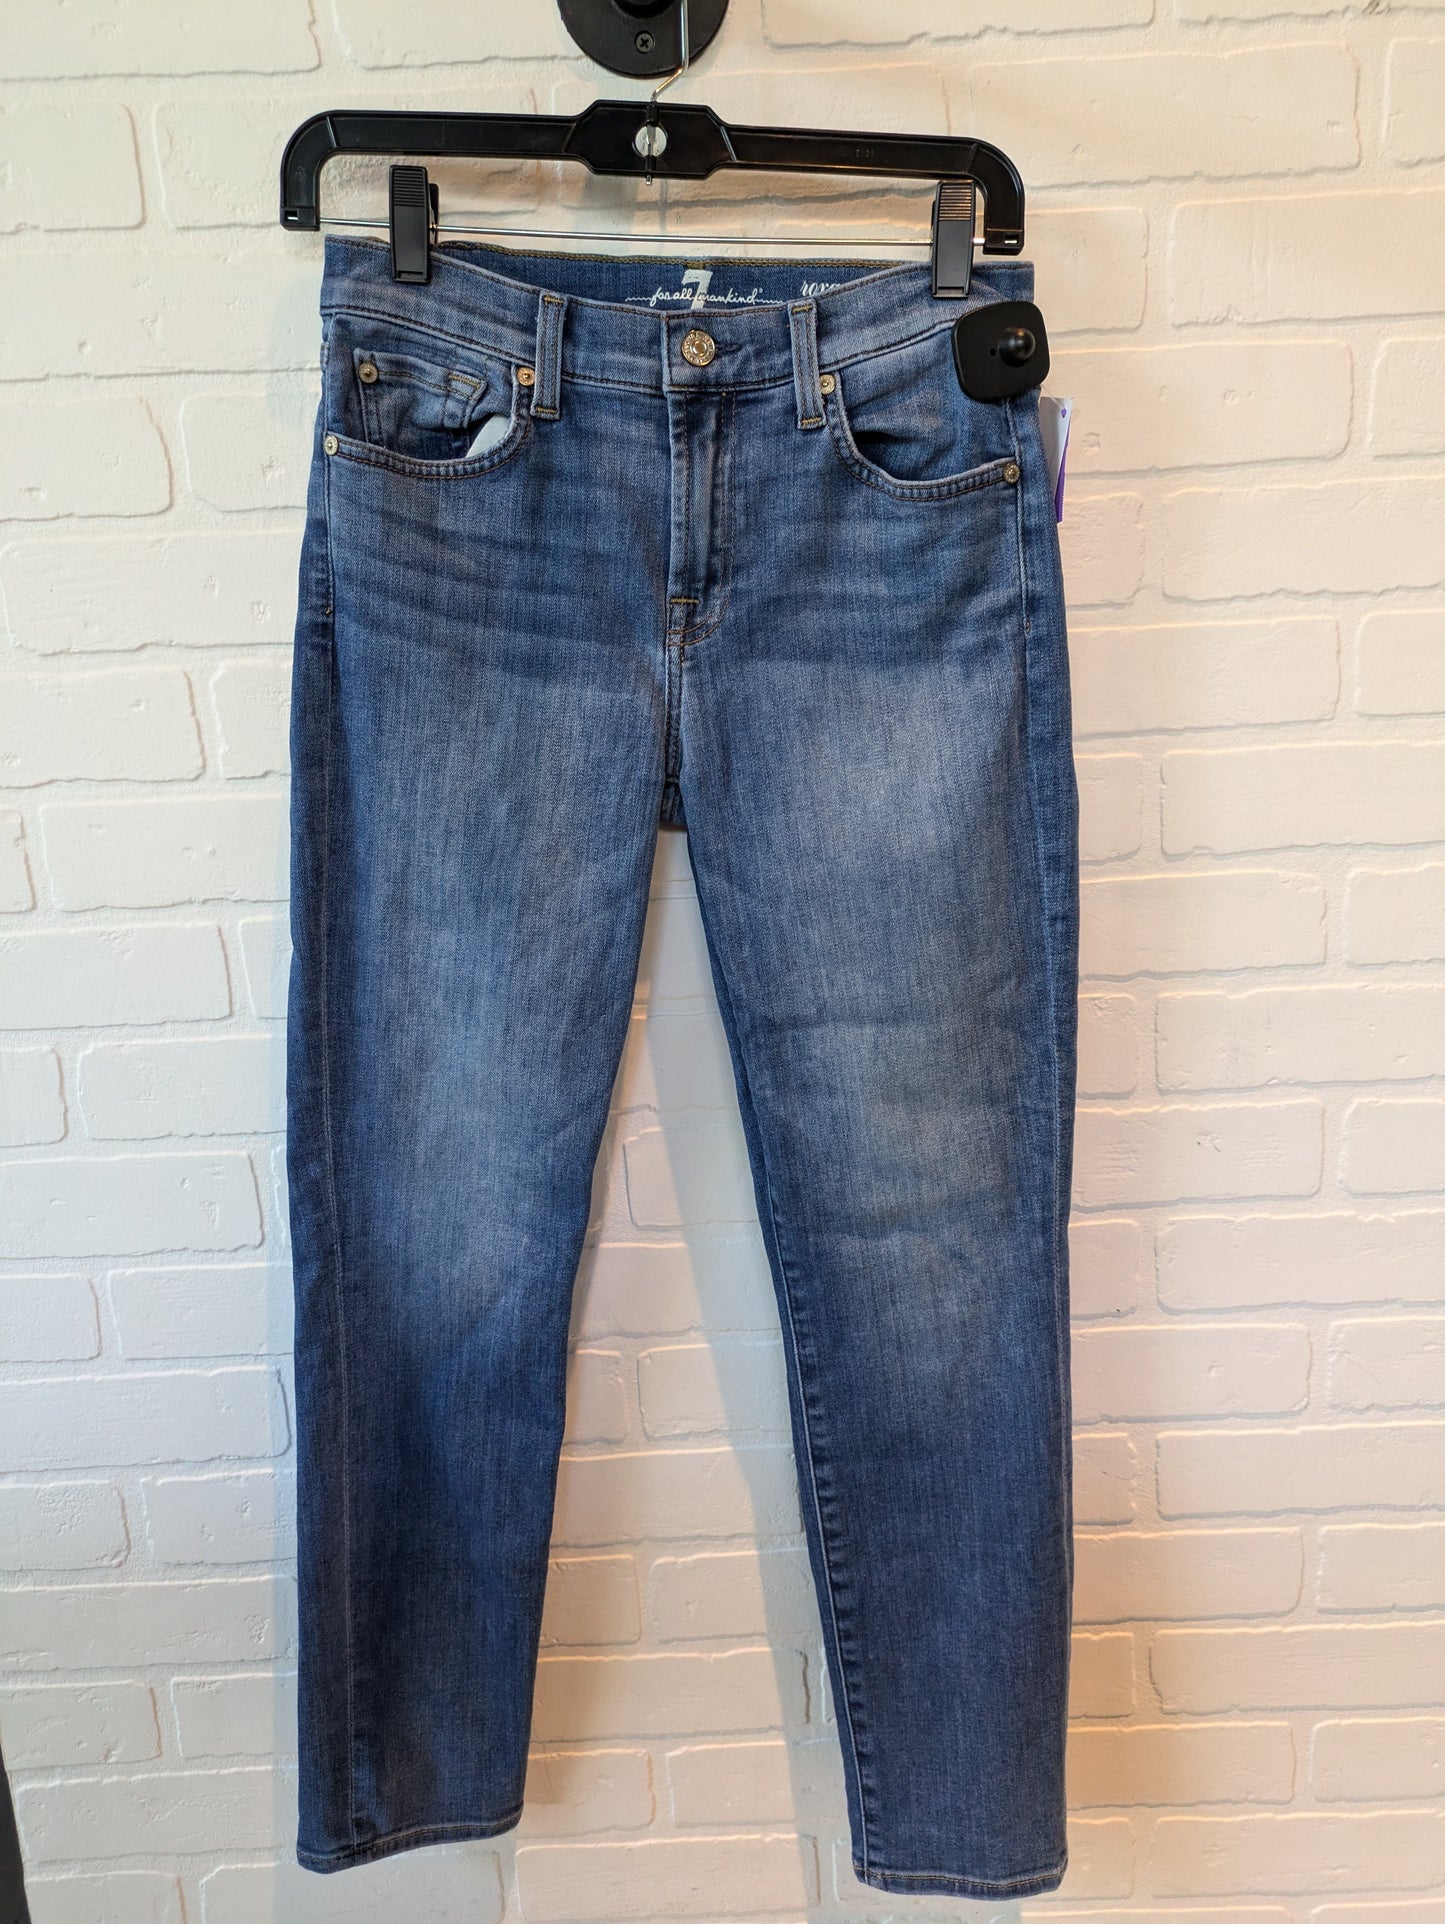 Blue Denim Jeans Straight 7 For All Mankind, Size 4